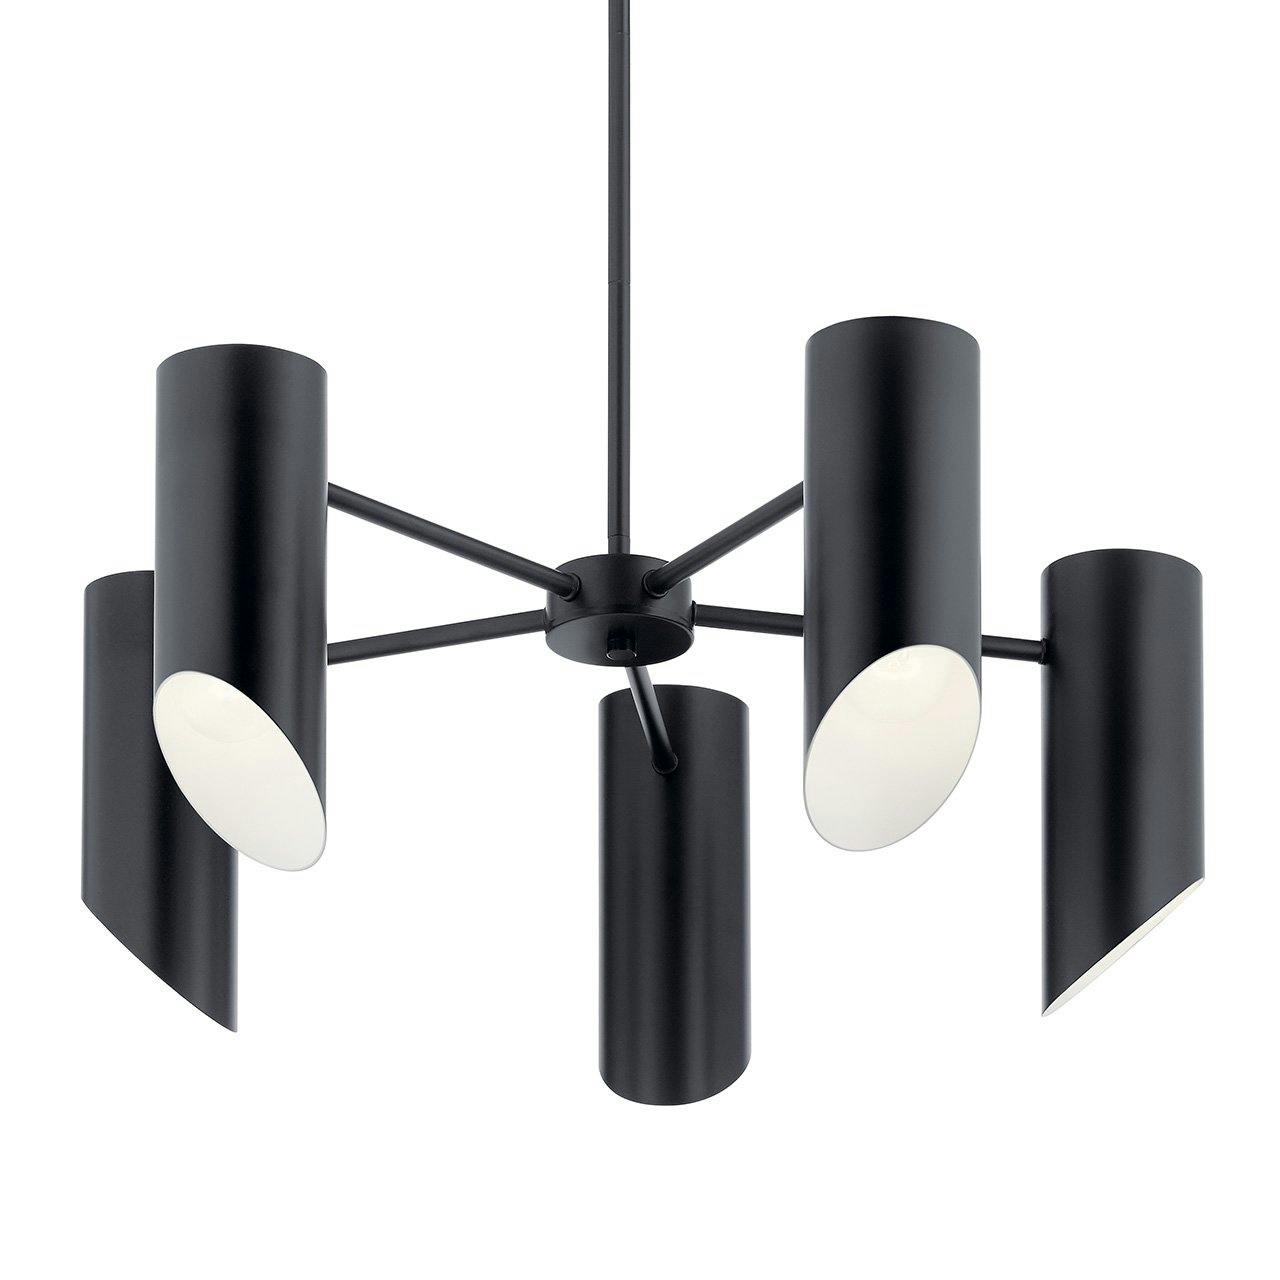 Trentino 5 Light Chandelier Black without the canopy on a white background